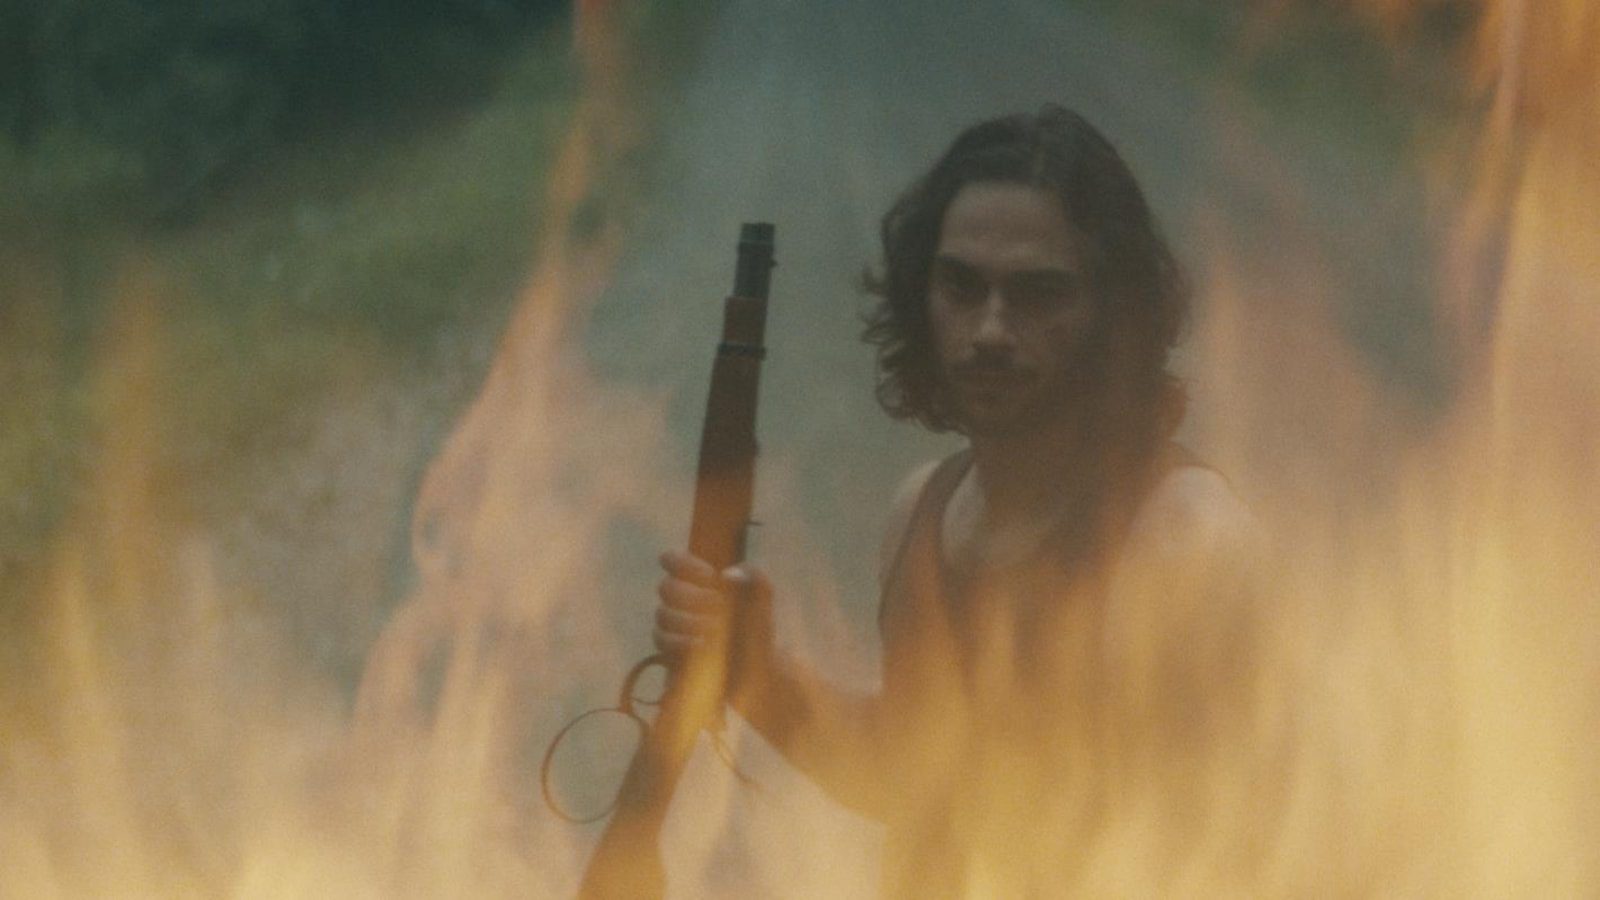 A young man with a pistol is seen through the flames.